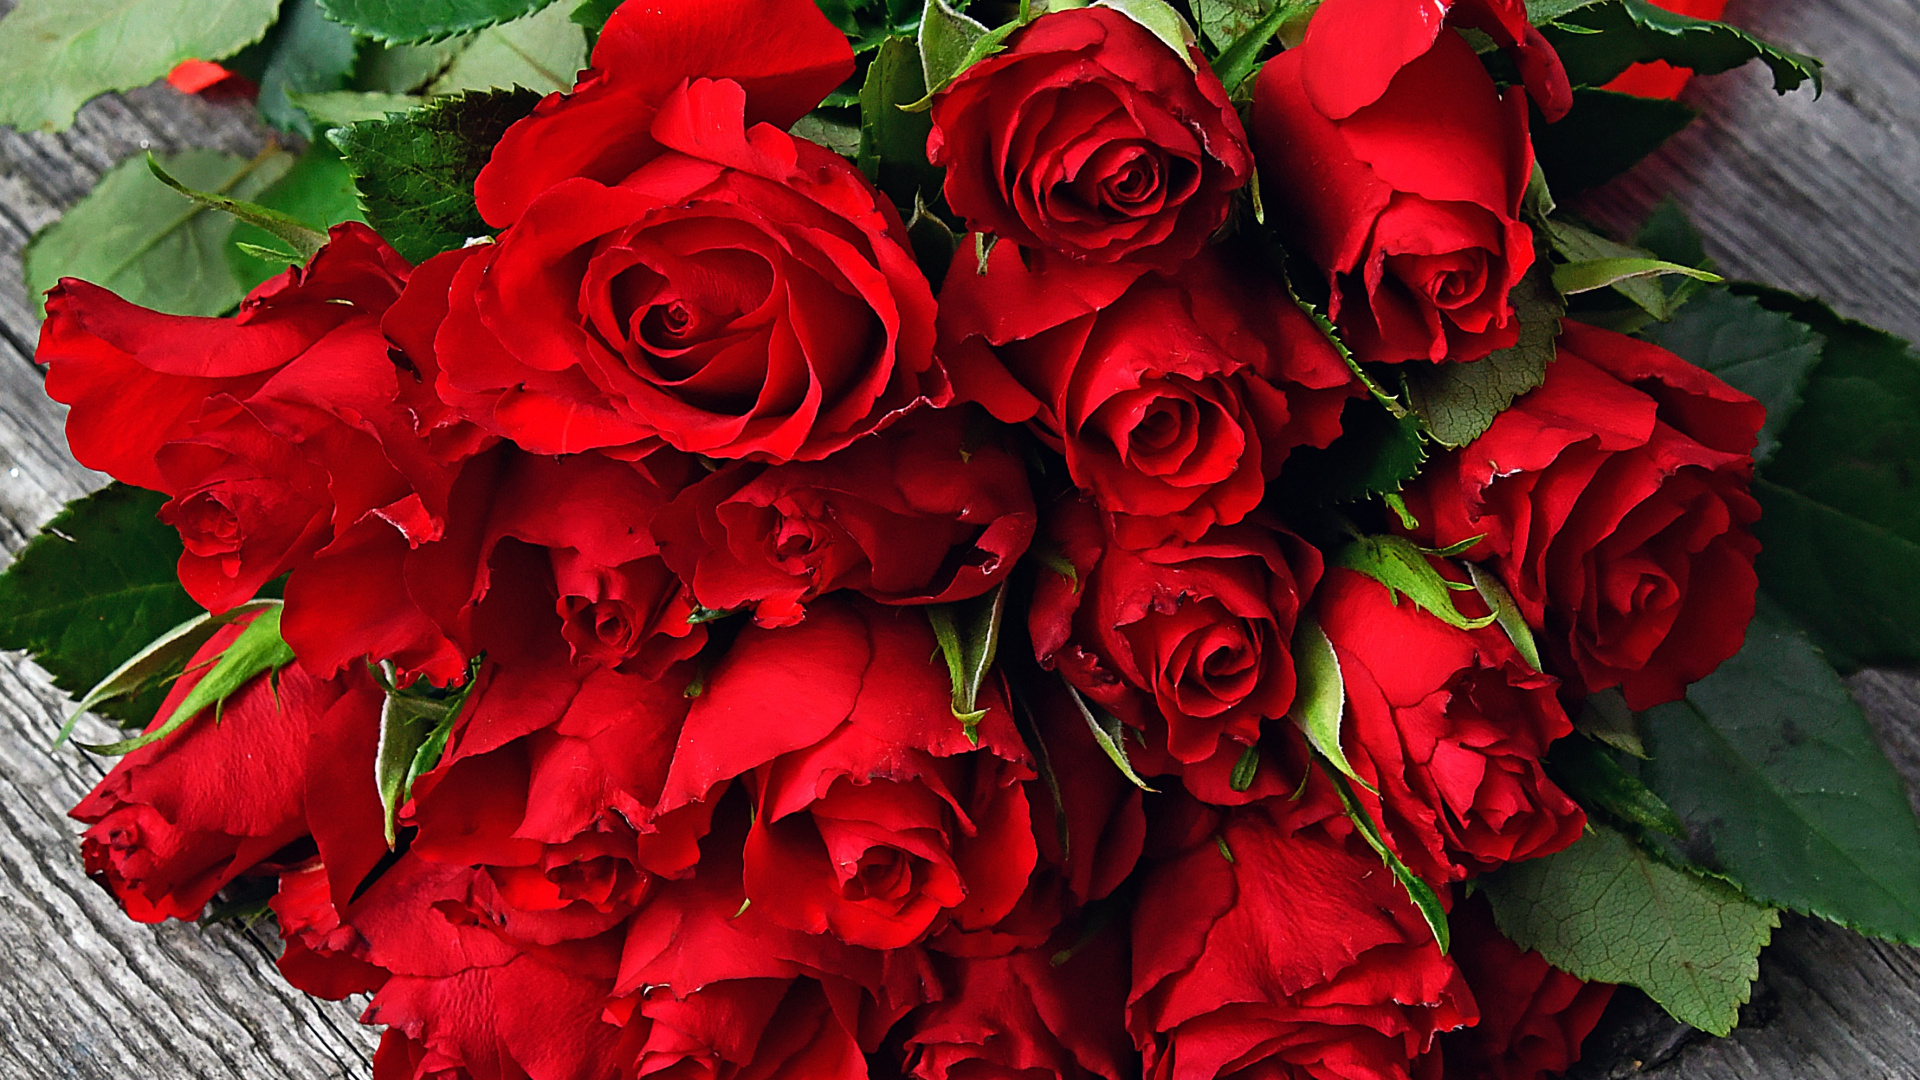 Downalod [1920x1080] - Romantic Red Roses , HD Wallpaper & Backgrounds